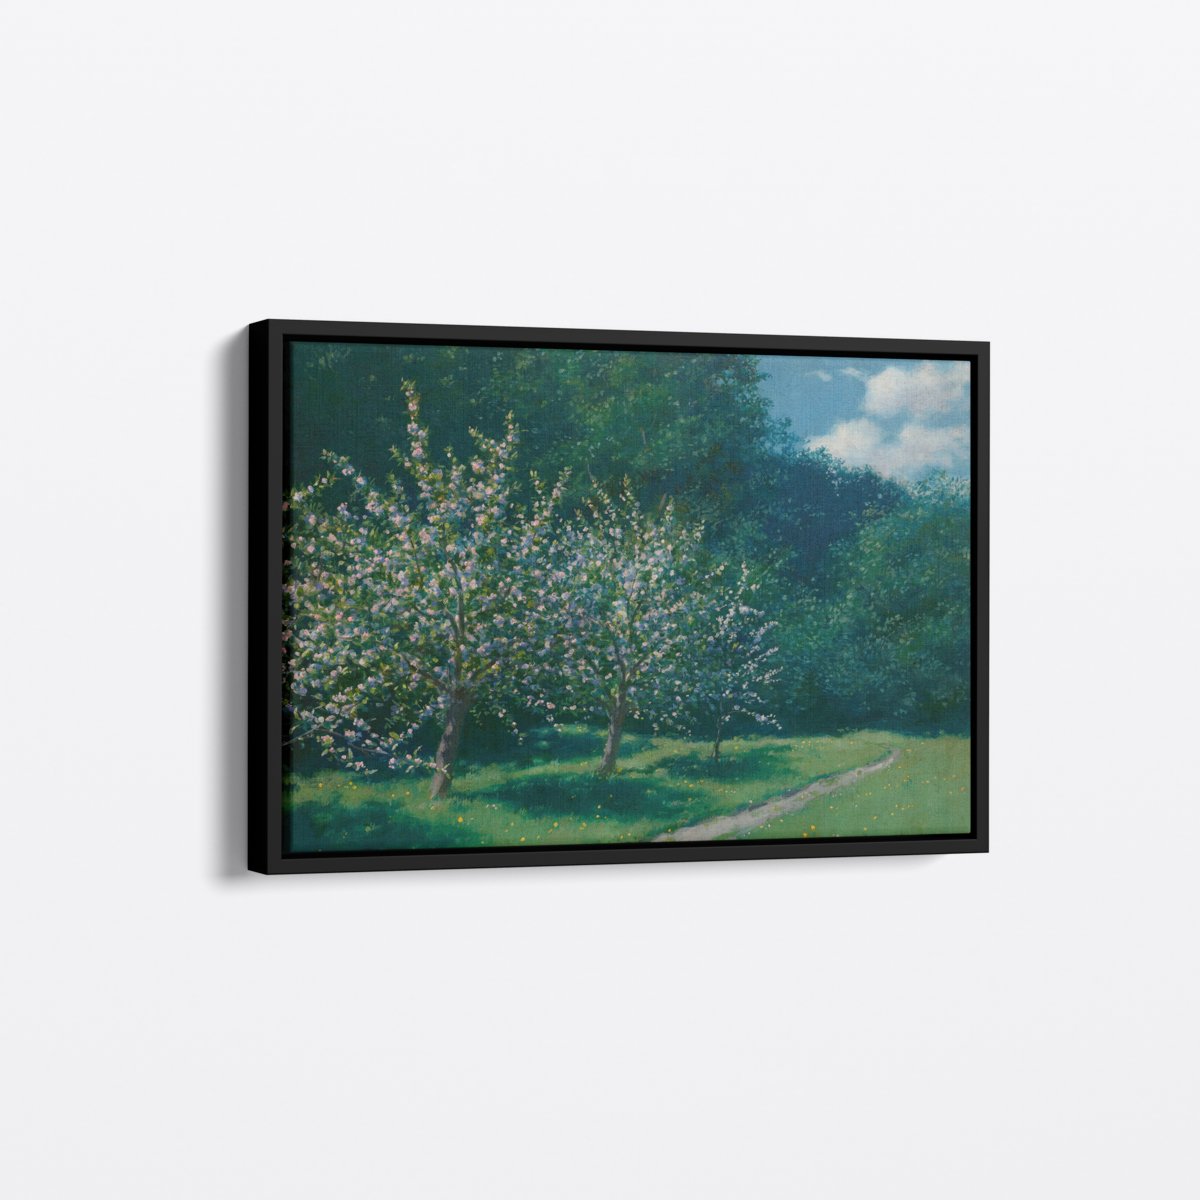 Apple Trees In Bloom | Stanisław Witkiewicz | Ave Legato | Canvas Art Prints | Vintage Artwork